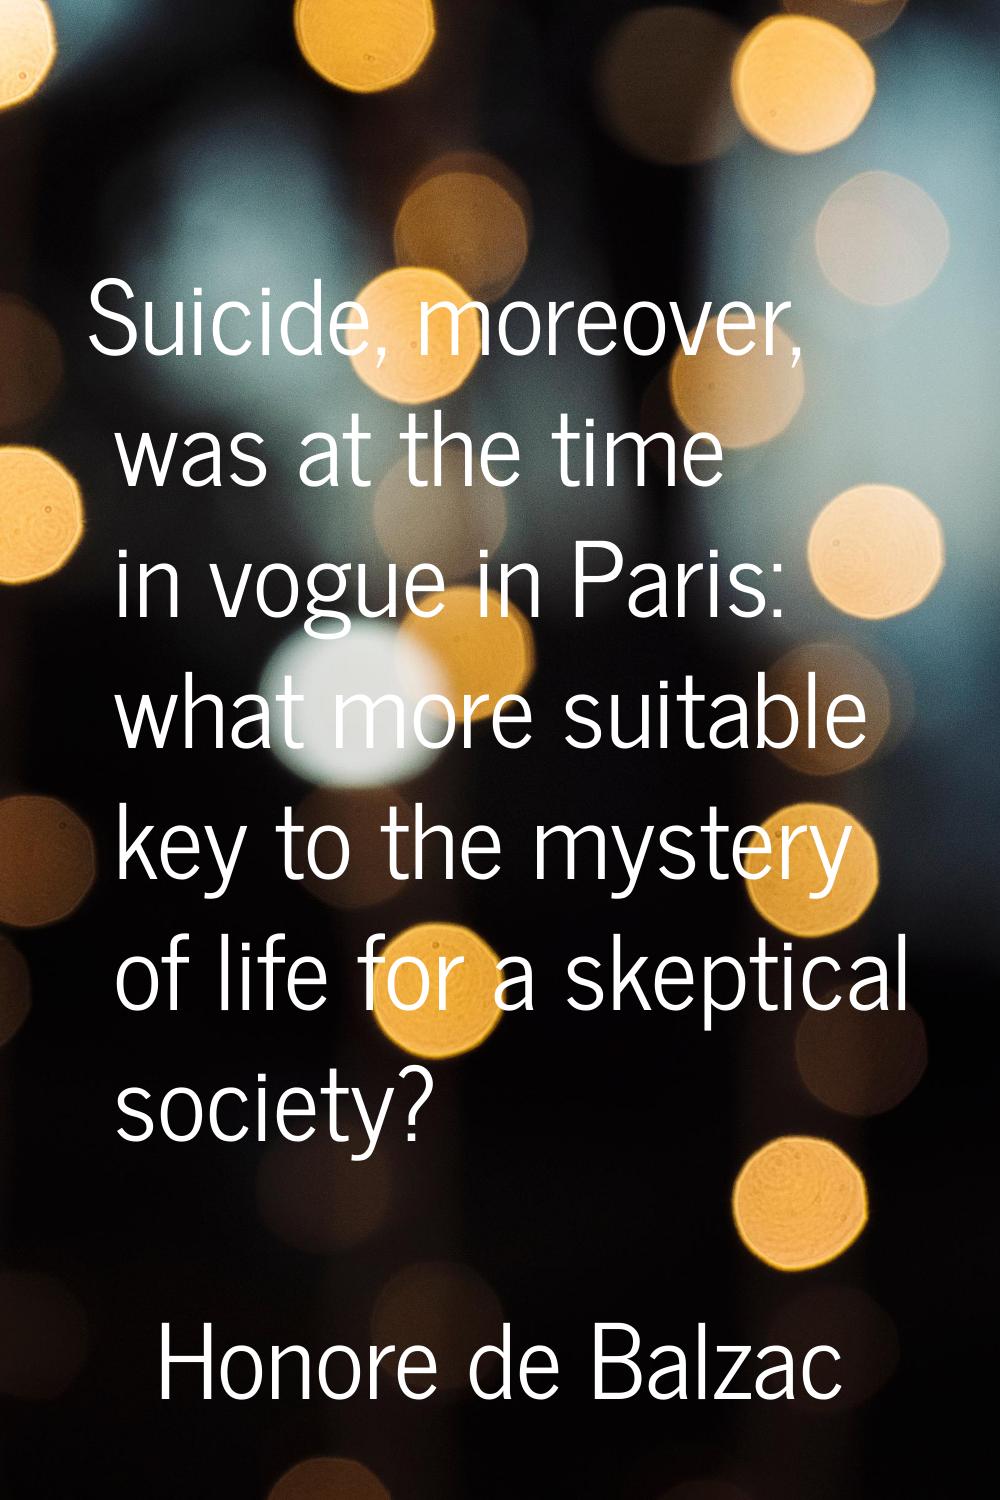 Suicide, moreover, was at the time in vogue in Paris: what more suitable key to the mystery of life